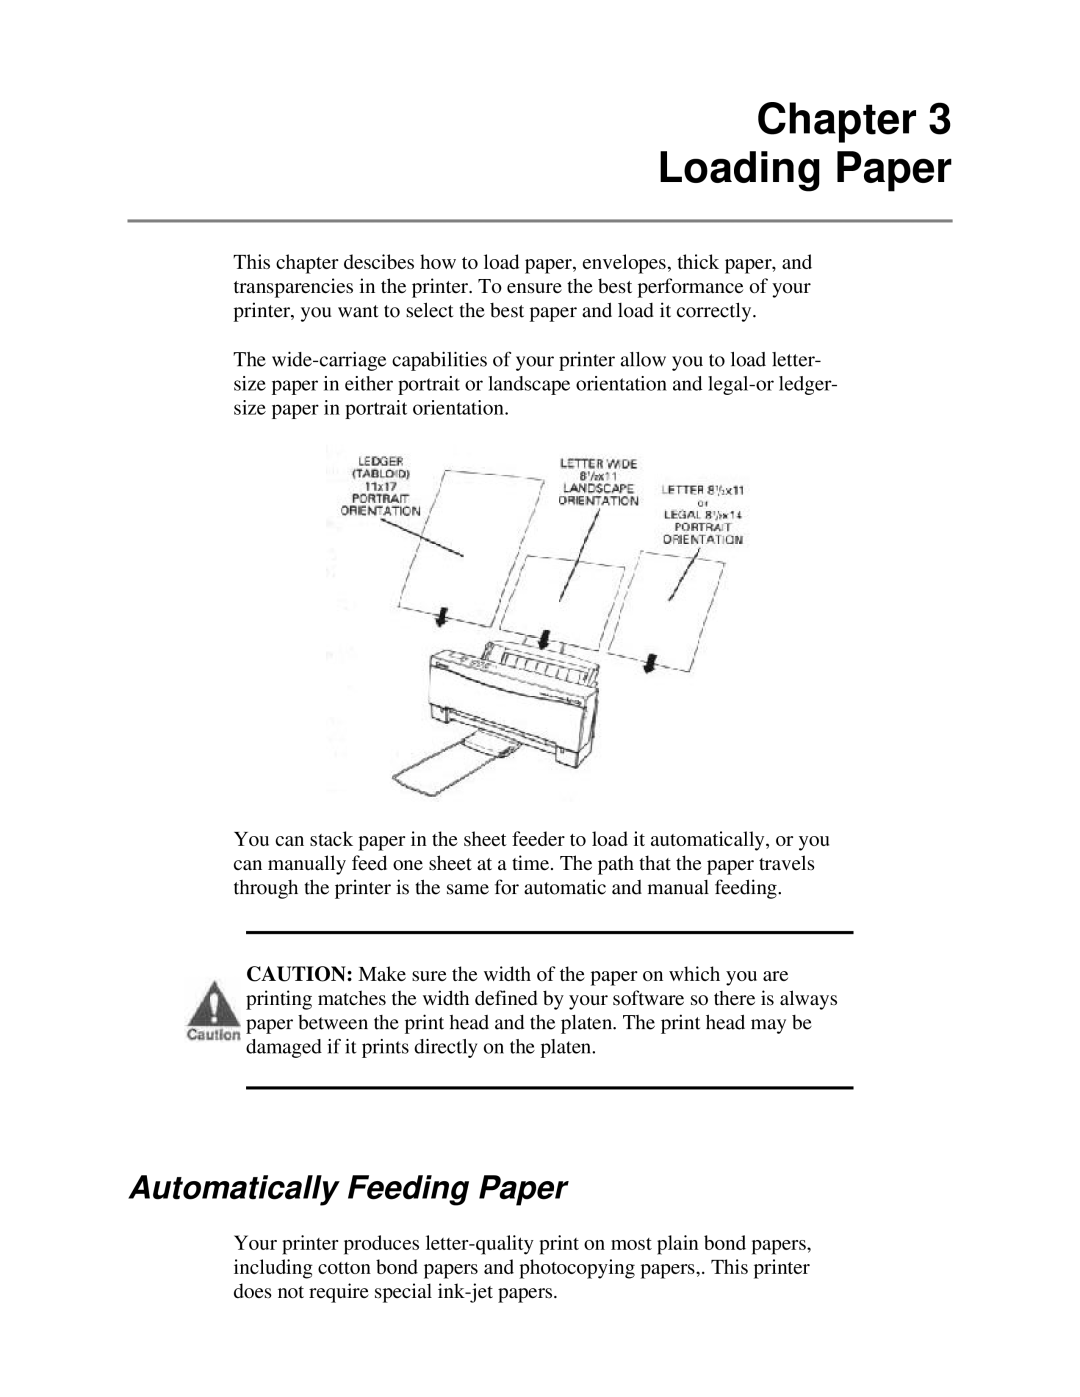 Canon BJ-230 user manual Chapter Loading Paper, Automatically Feeding Paper 